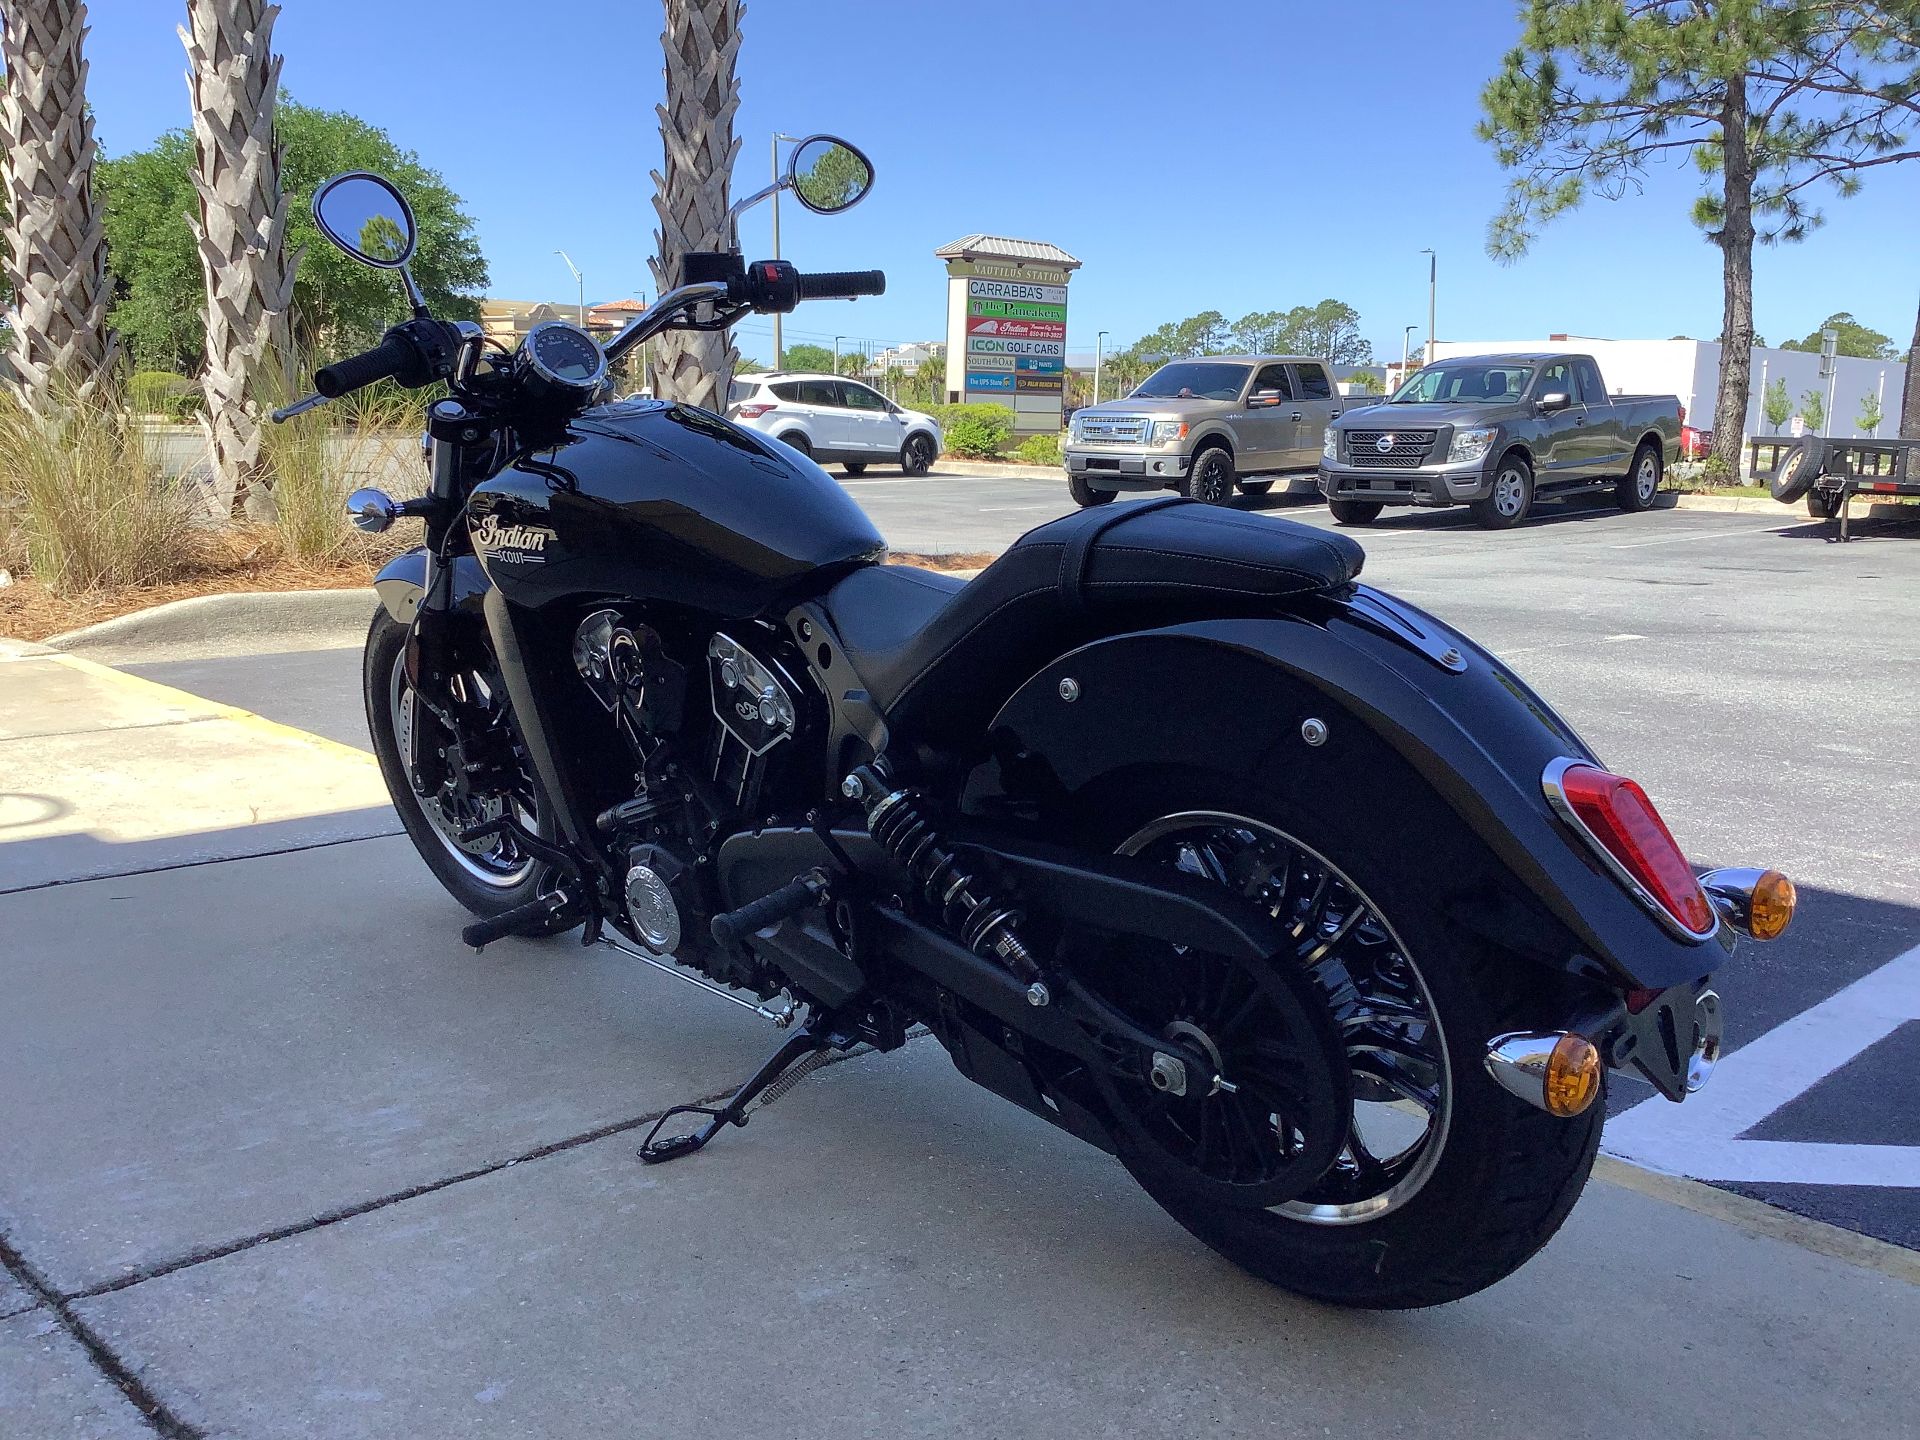 2022 Indian SCOUT NON ABS in Panama City Beach, Florida - Photo 8